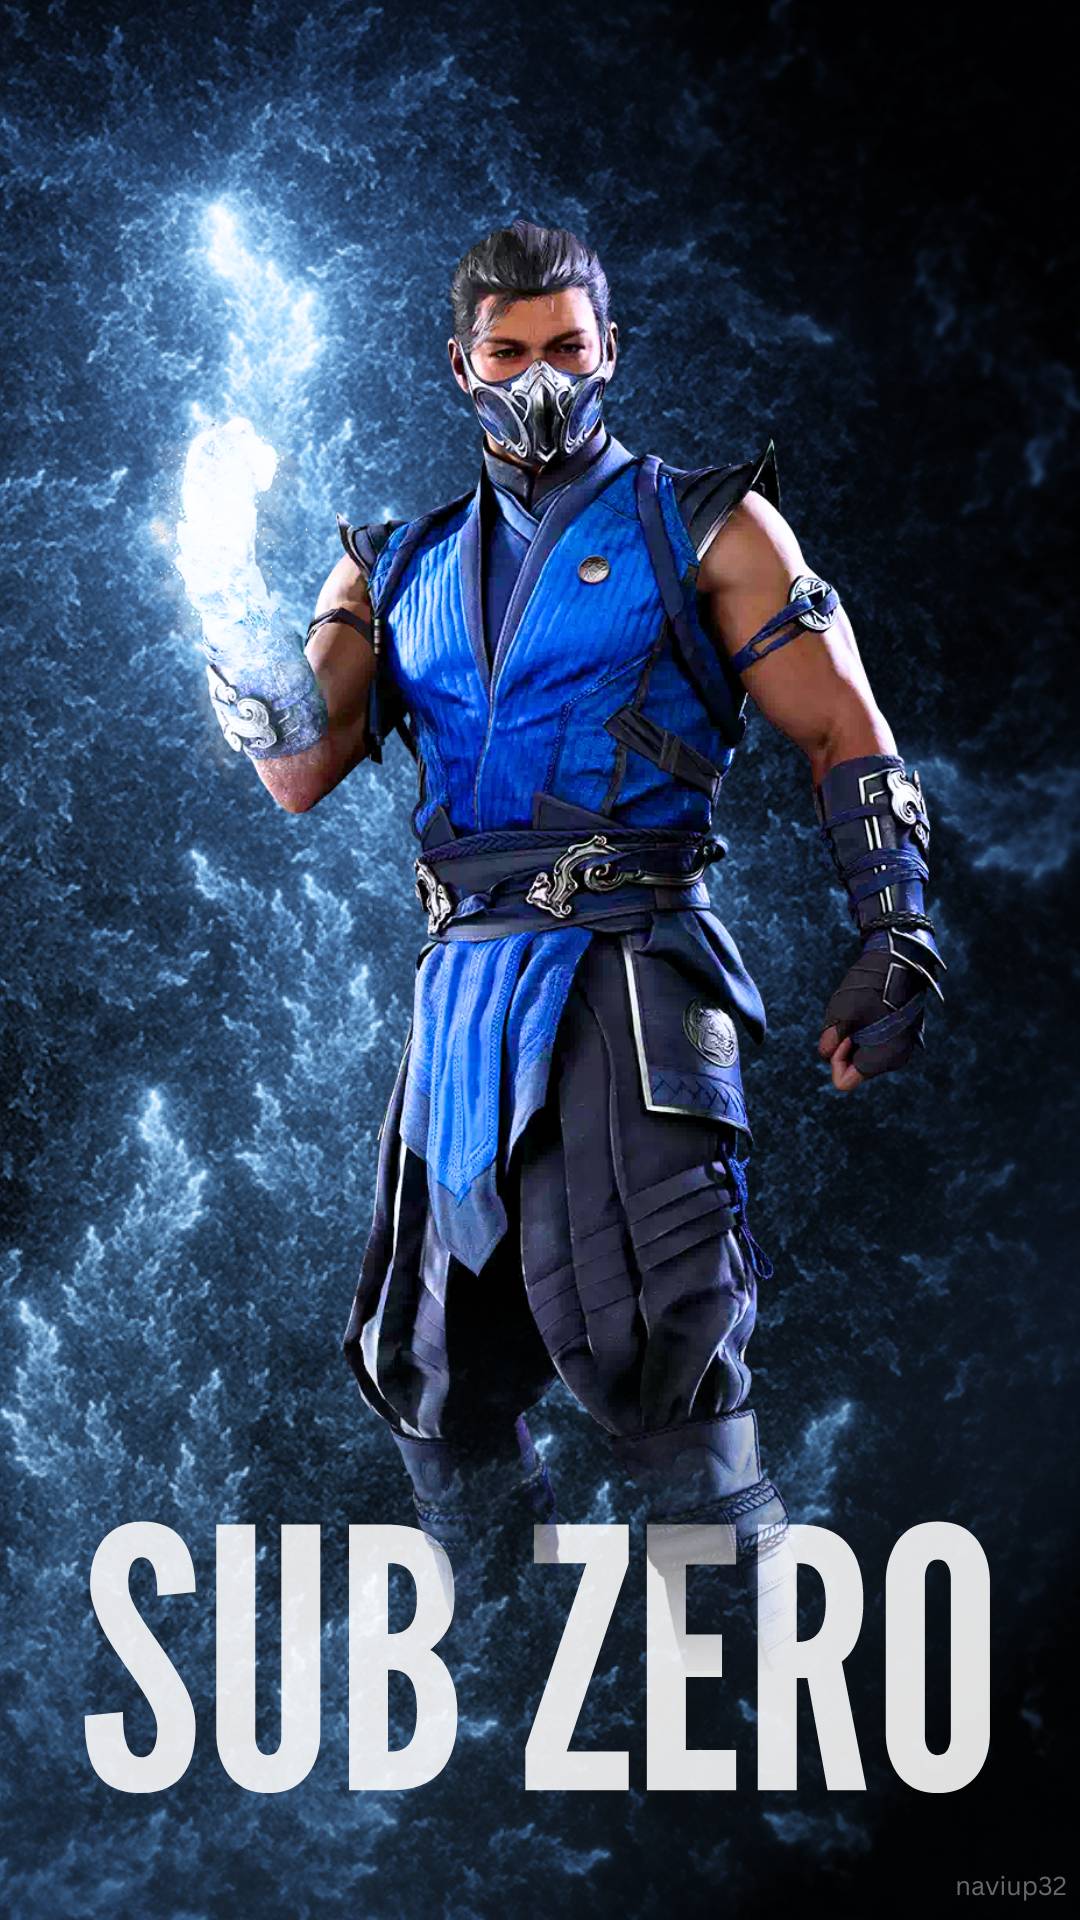 First Look: Mortal Kombat Movie Poster Featuring Sub-Zero and